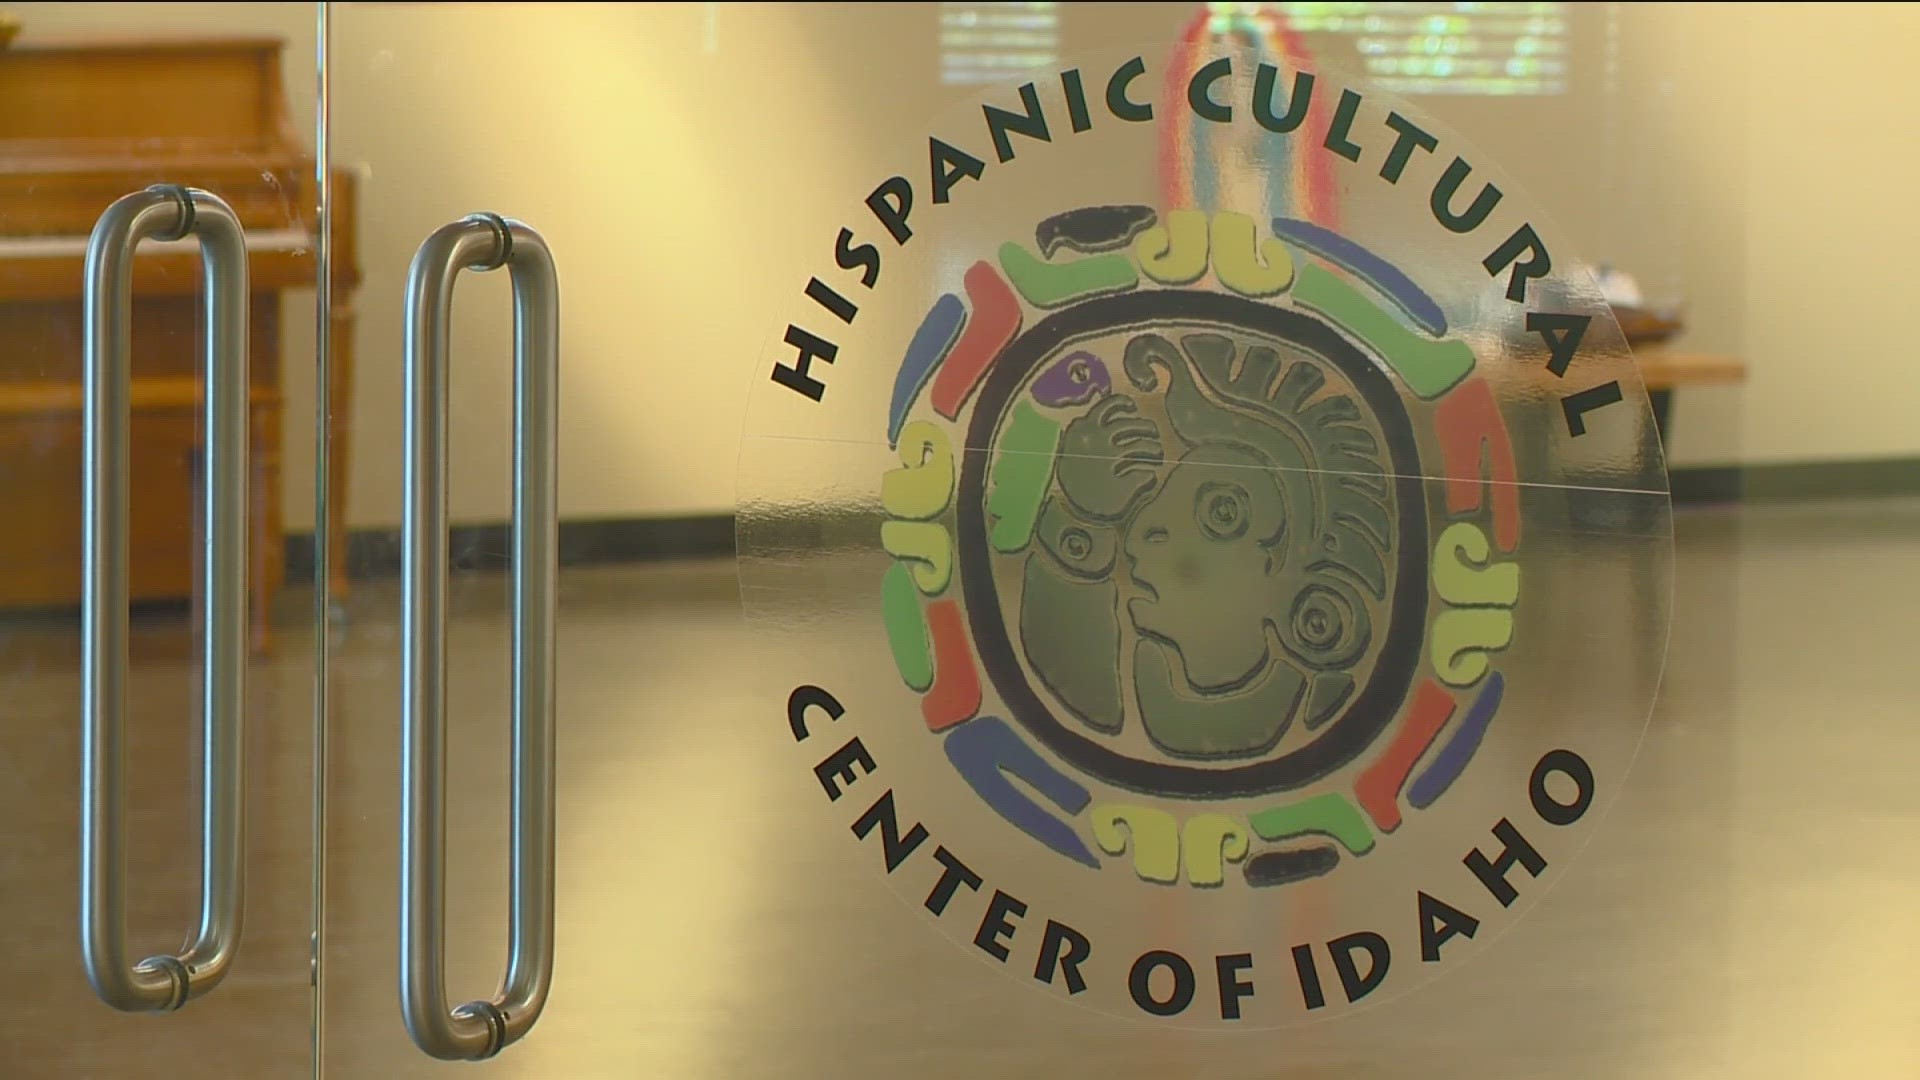 Hispanic organizations hope Friday's news conference is the first step toward revitalizing the center and building a stronger connection with the Hispanic community.